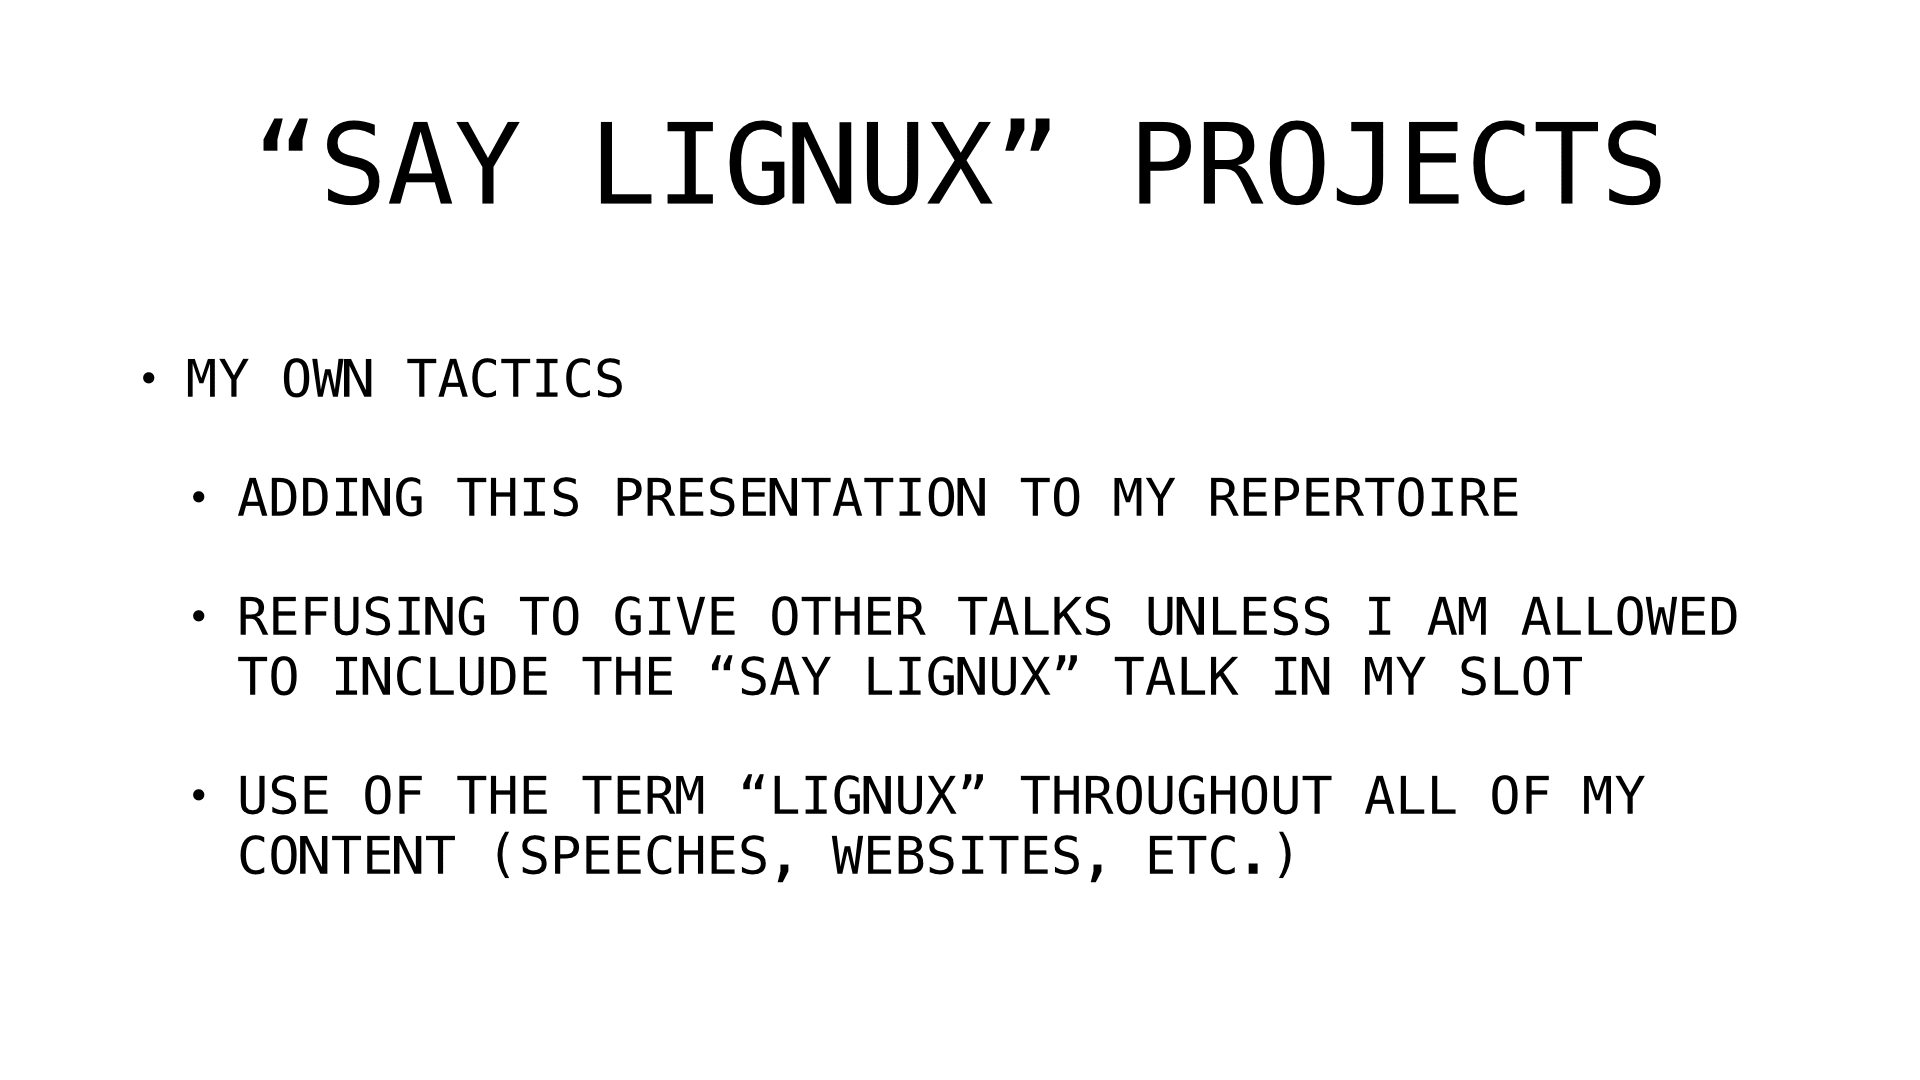 say lignux projects 4